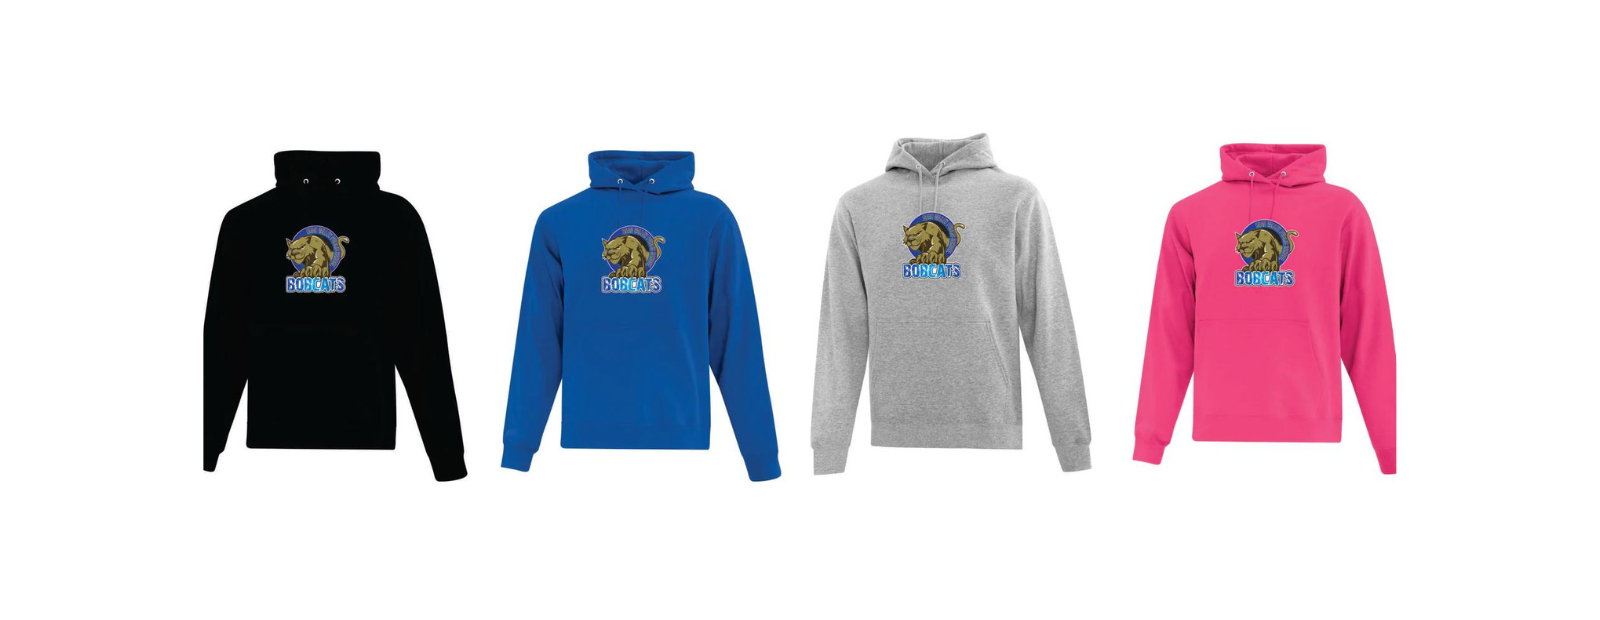 Beau Valley Hooded Sweatshirts in black, blue, gray, and pink